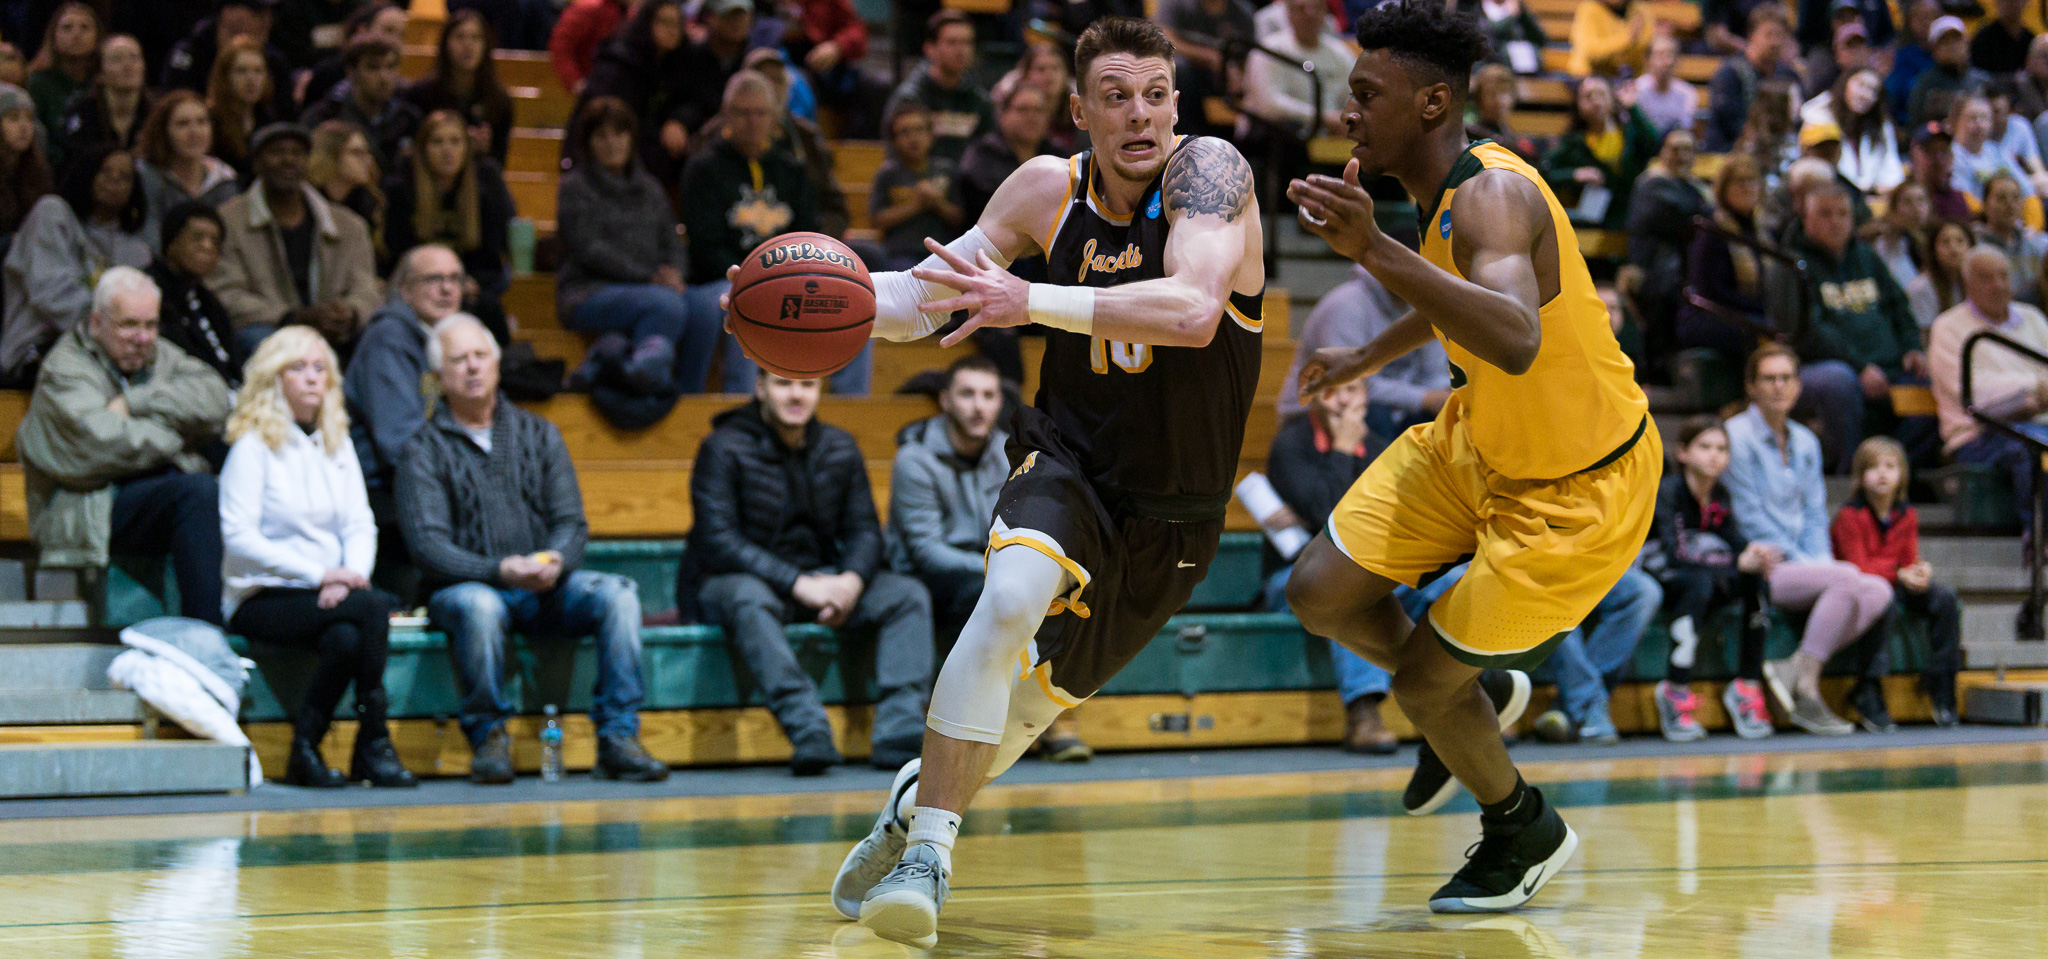 Senior guard Kyle Nader recorded a career-high 18 points and 10 rebounds in the second round loss to Oswego St. (Photo Courtesy of Jesse Kucewicz)